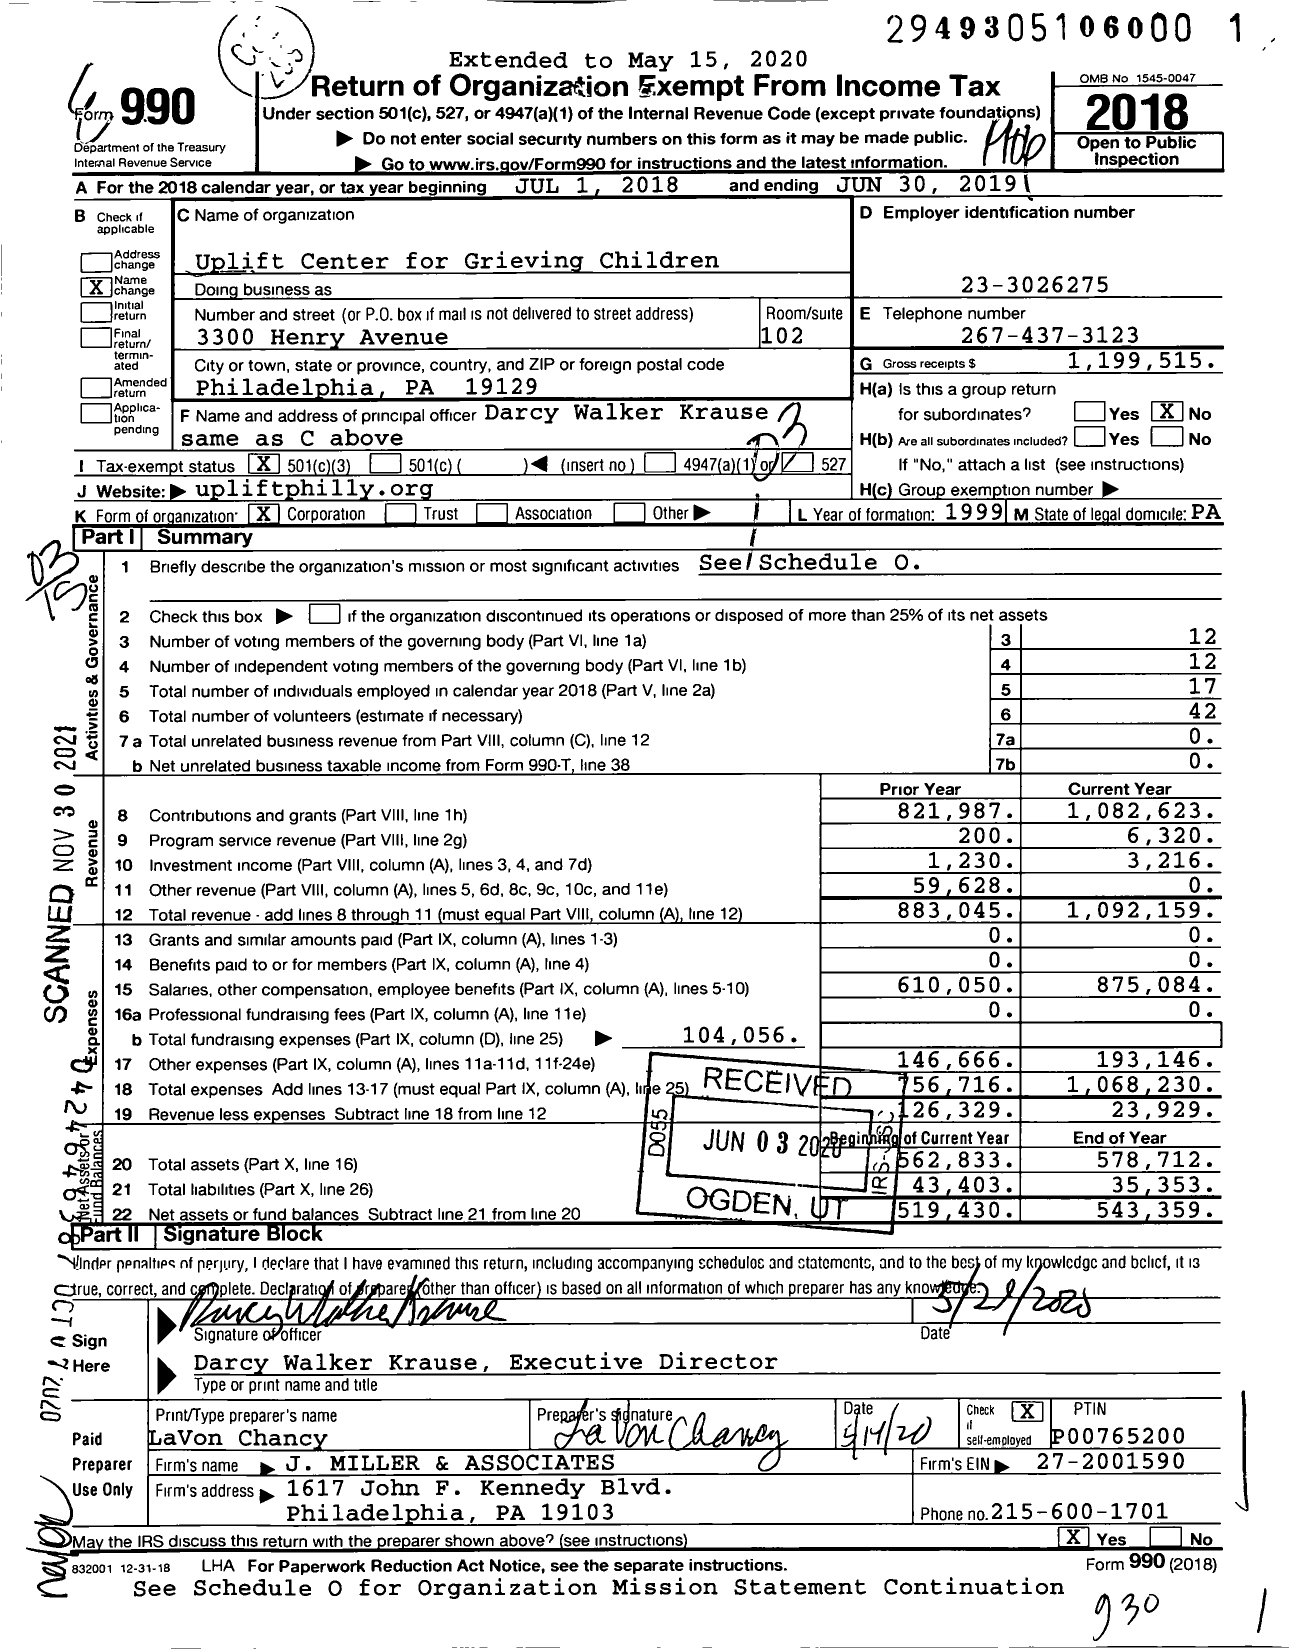 Image of first page of 2018 Form 990 for Uplift Center for Grieving Children